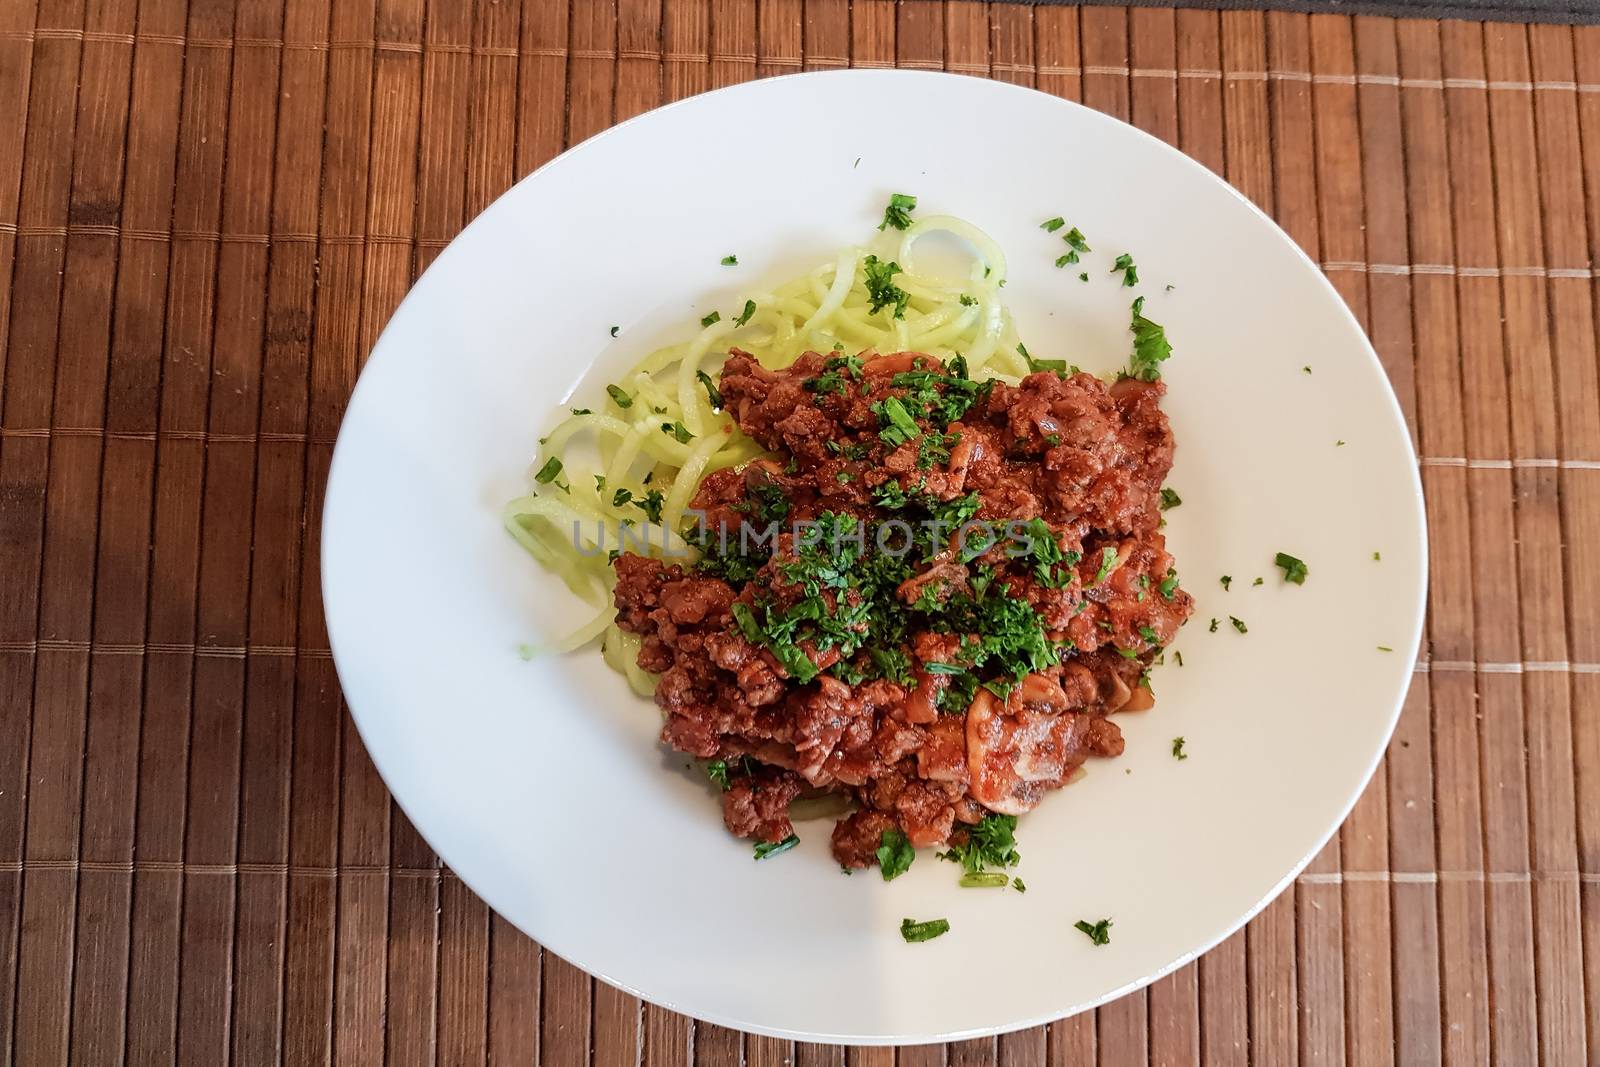 Healthy low carb food on white plate, lunch with snake cucumber in spaghetti strips cut above beef tartare with tomato sauce.